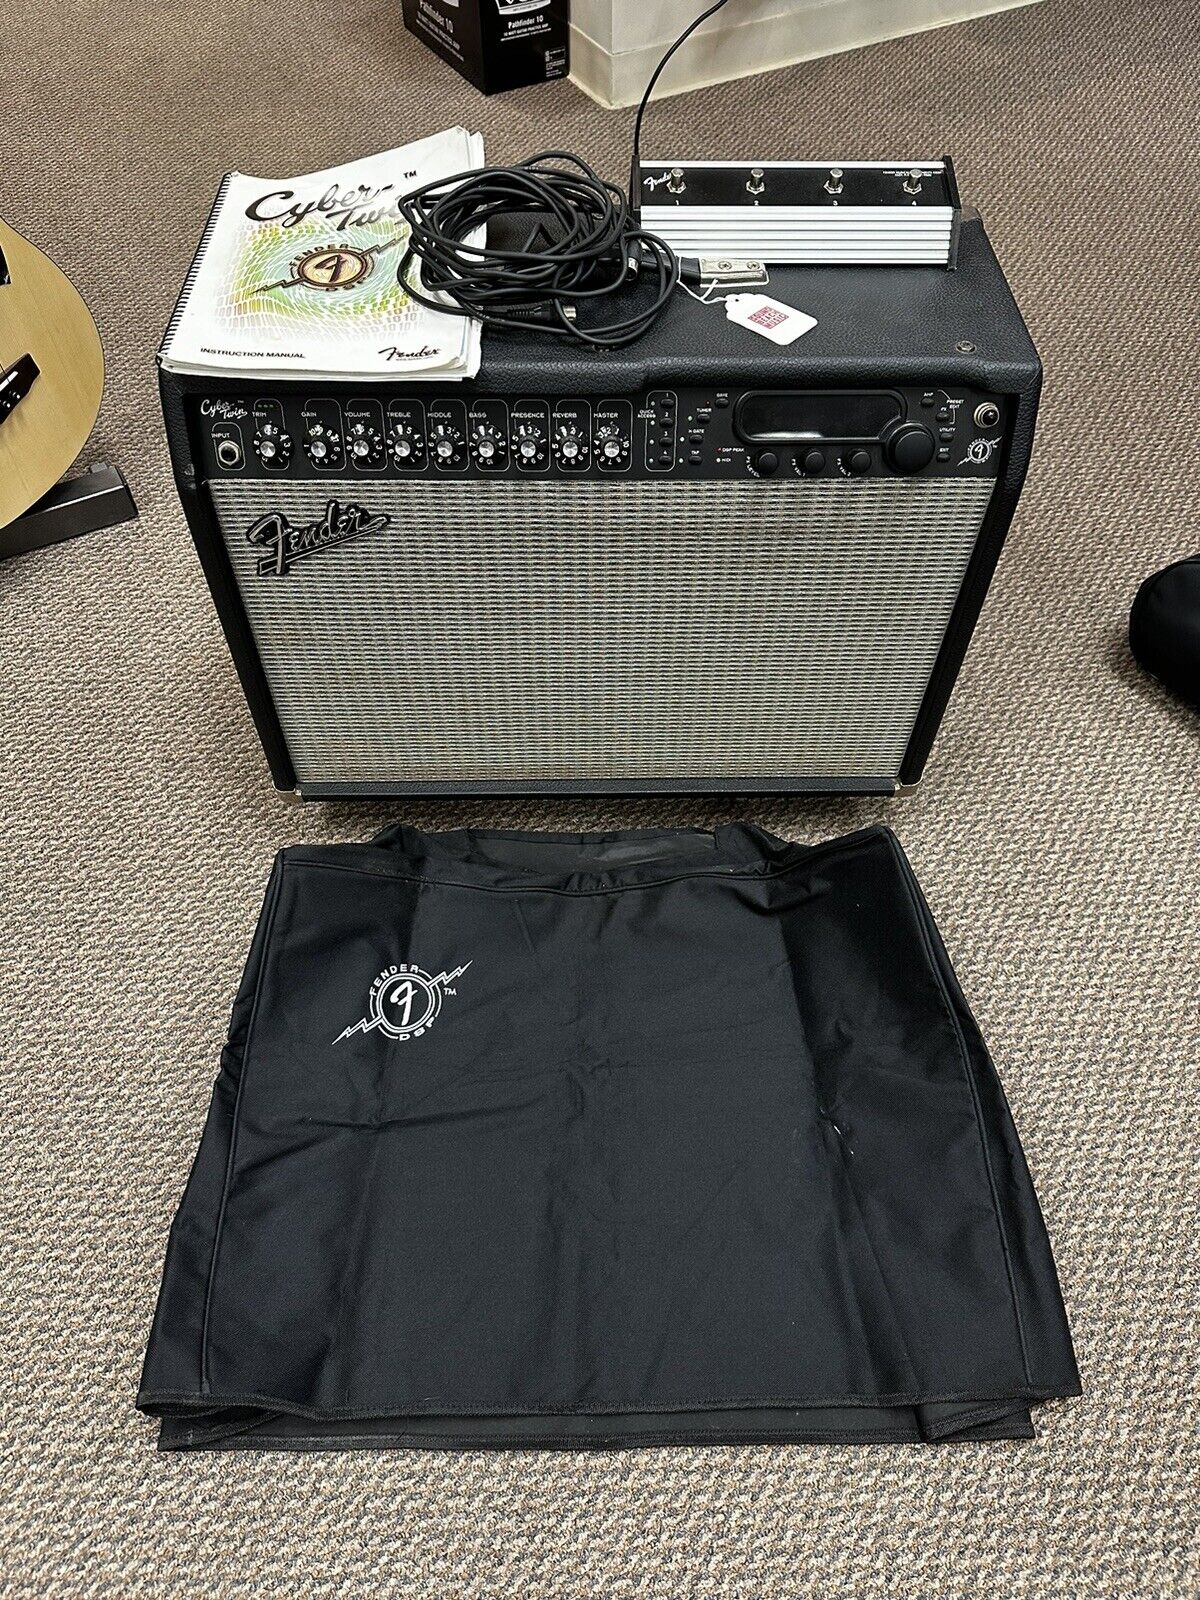 2002 Fender Cyber-Twin Guitar Amp w/ Motorized Knobs & Extras